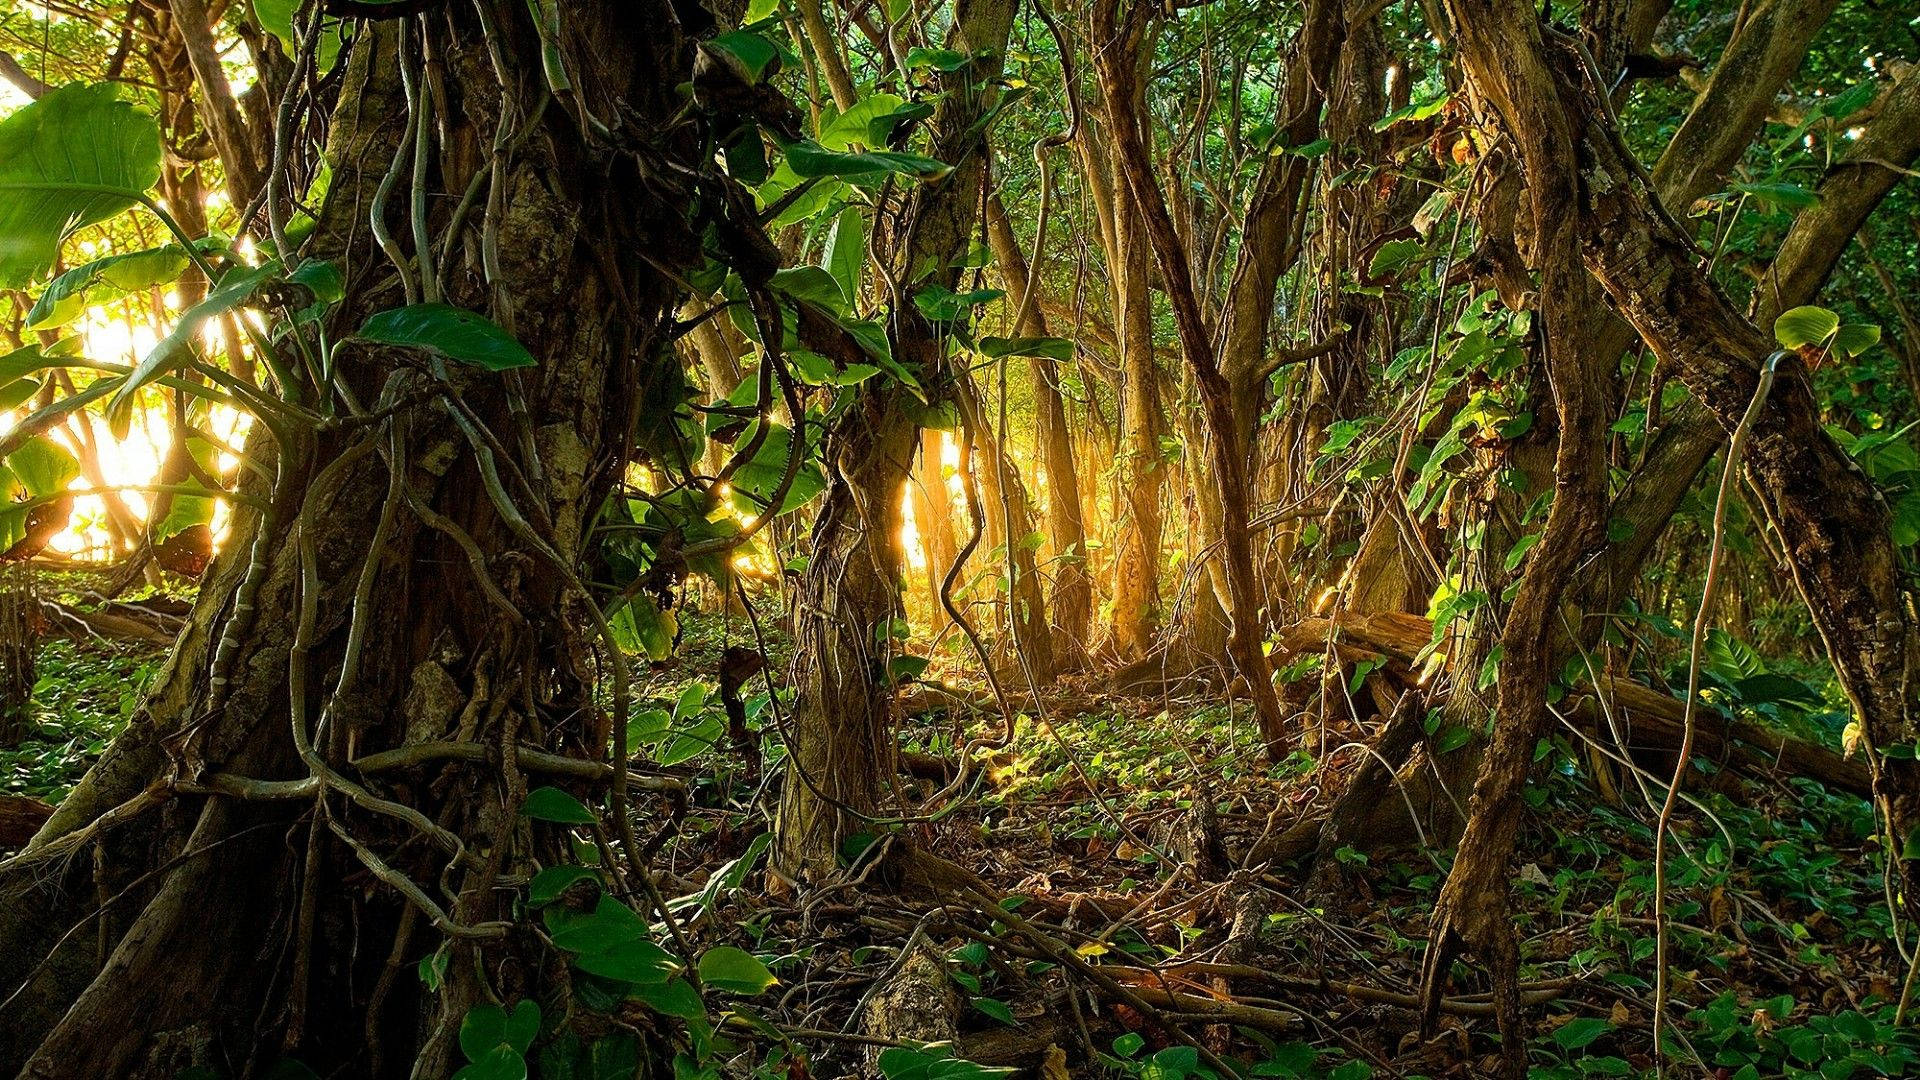 A sunset in the forest with trees and vines - Jungle